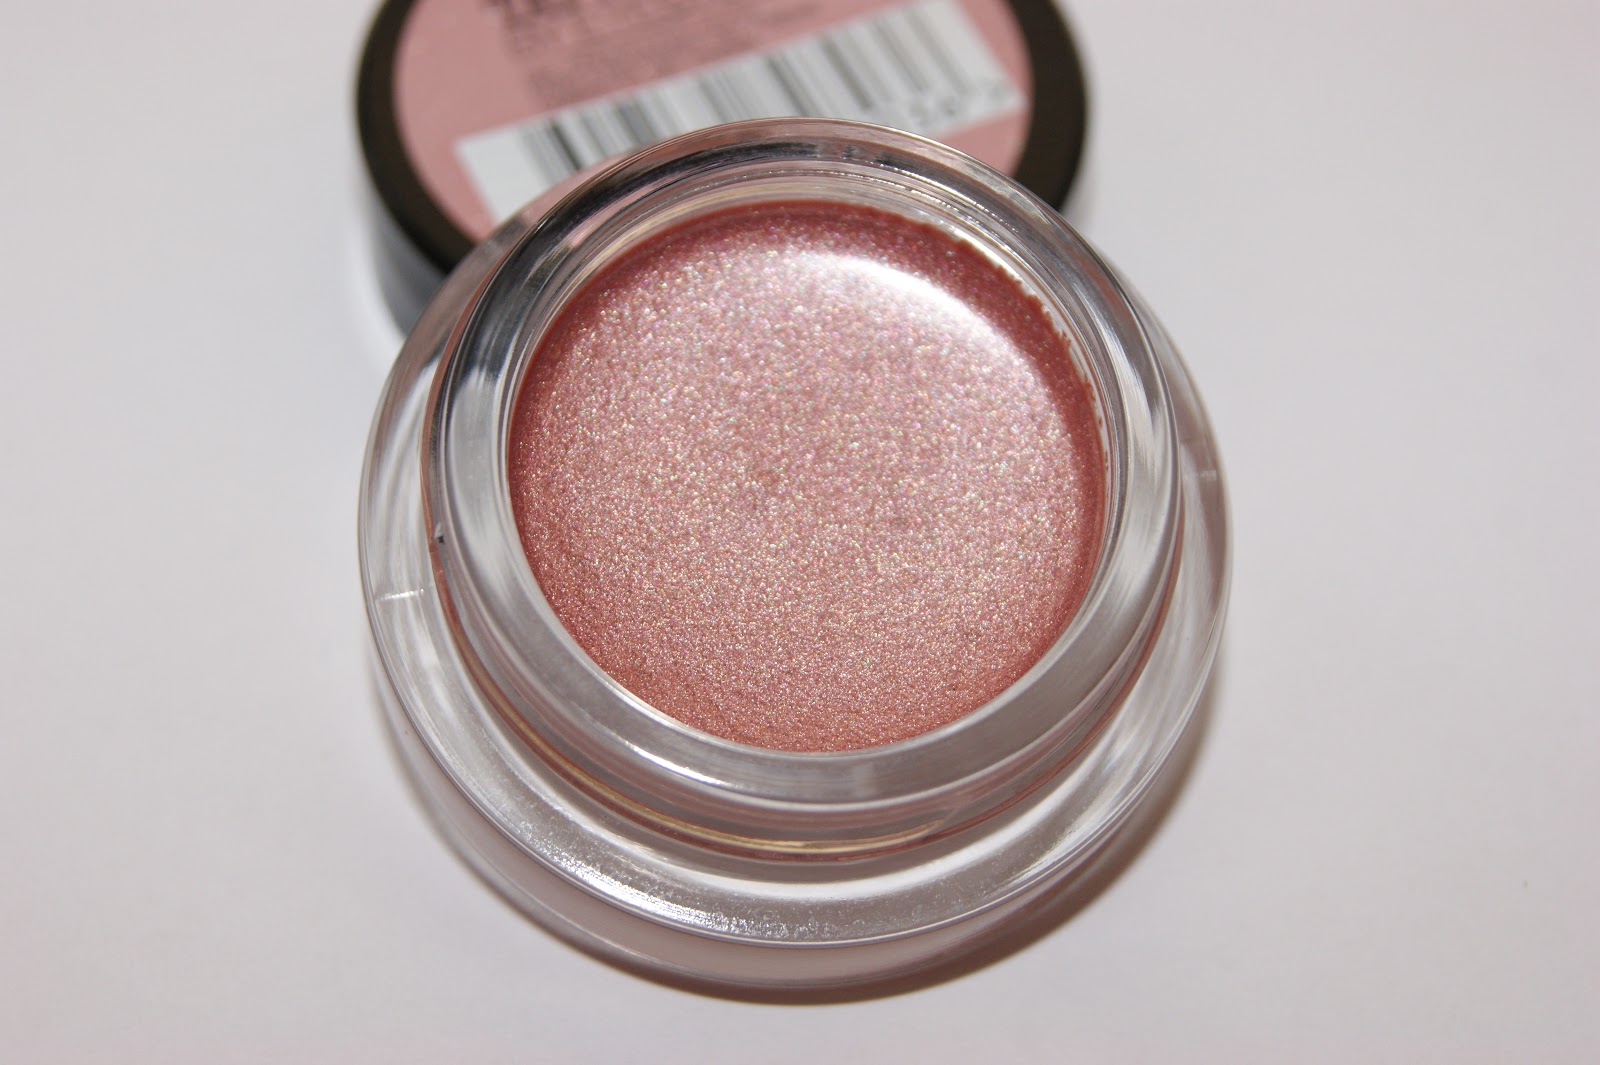 Maybelline Color Tattoo 24hr Eyeshadow Pink Gold Review Swatches 006.jpg